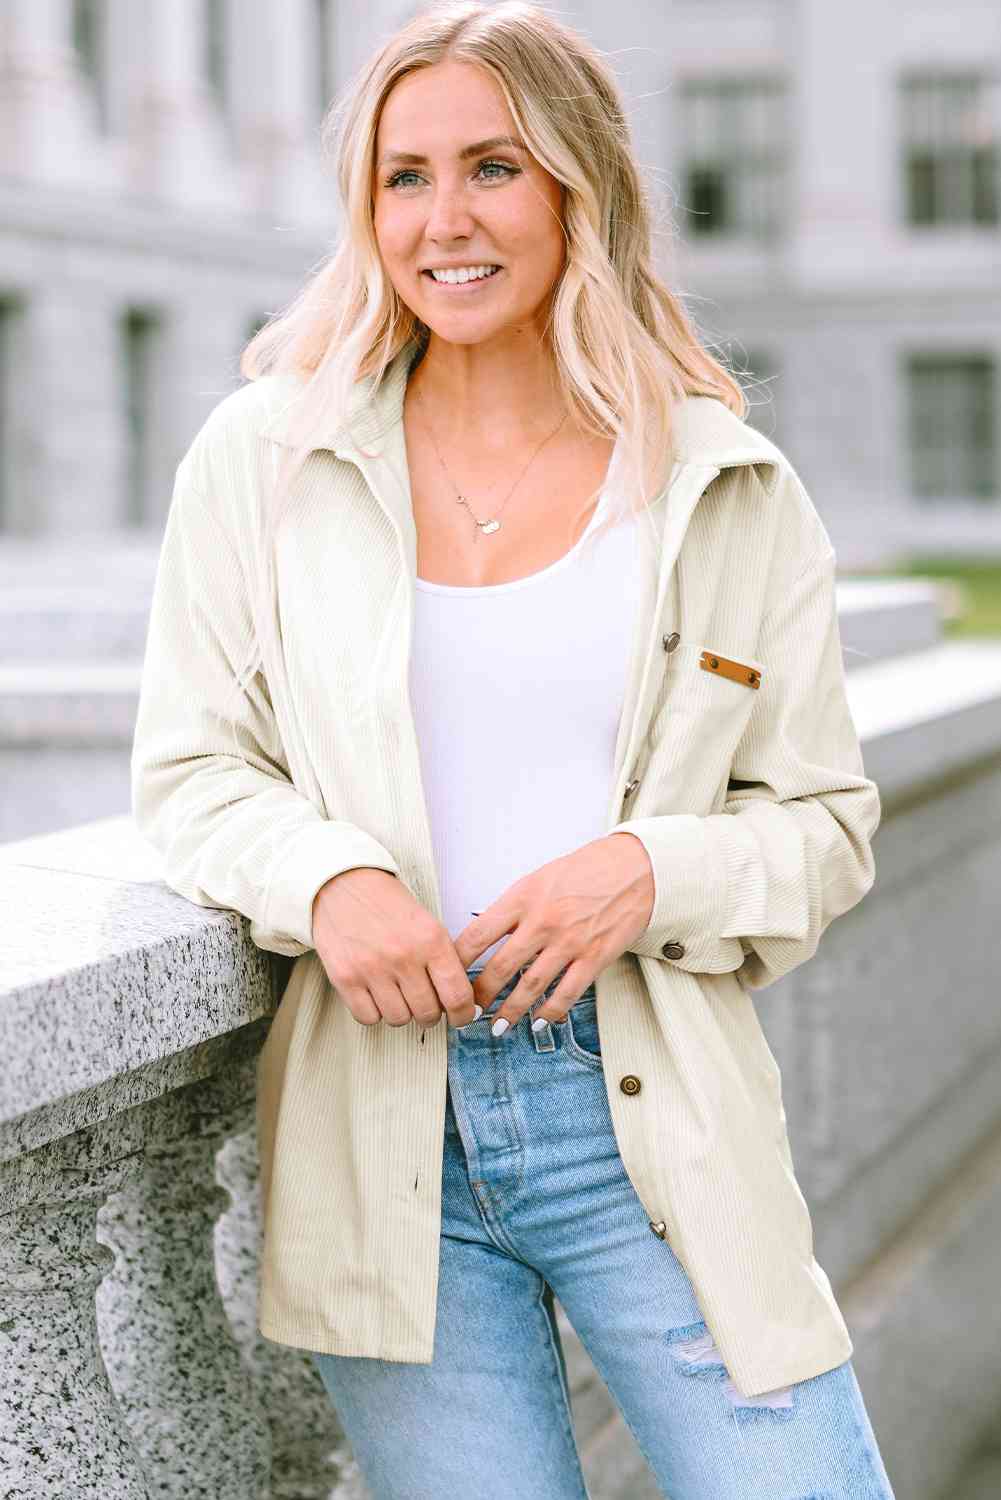 Collared Neck Button Down Jacket